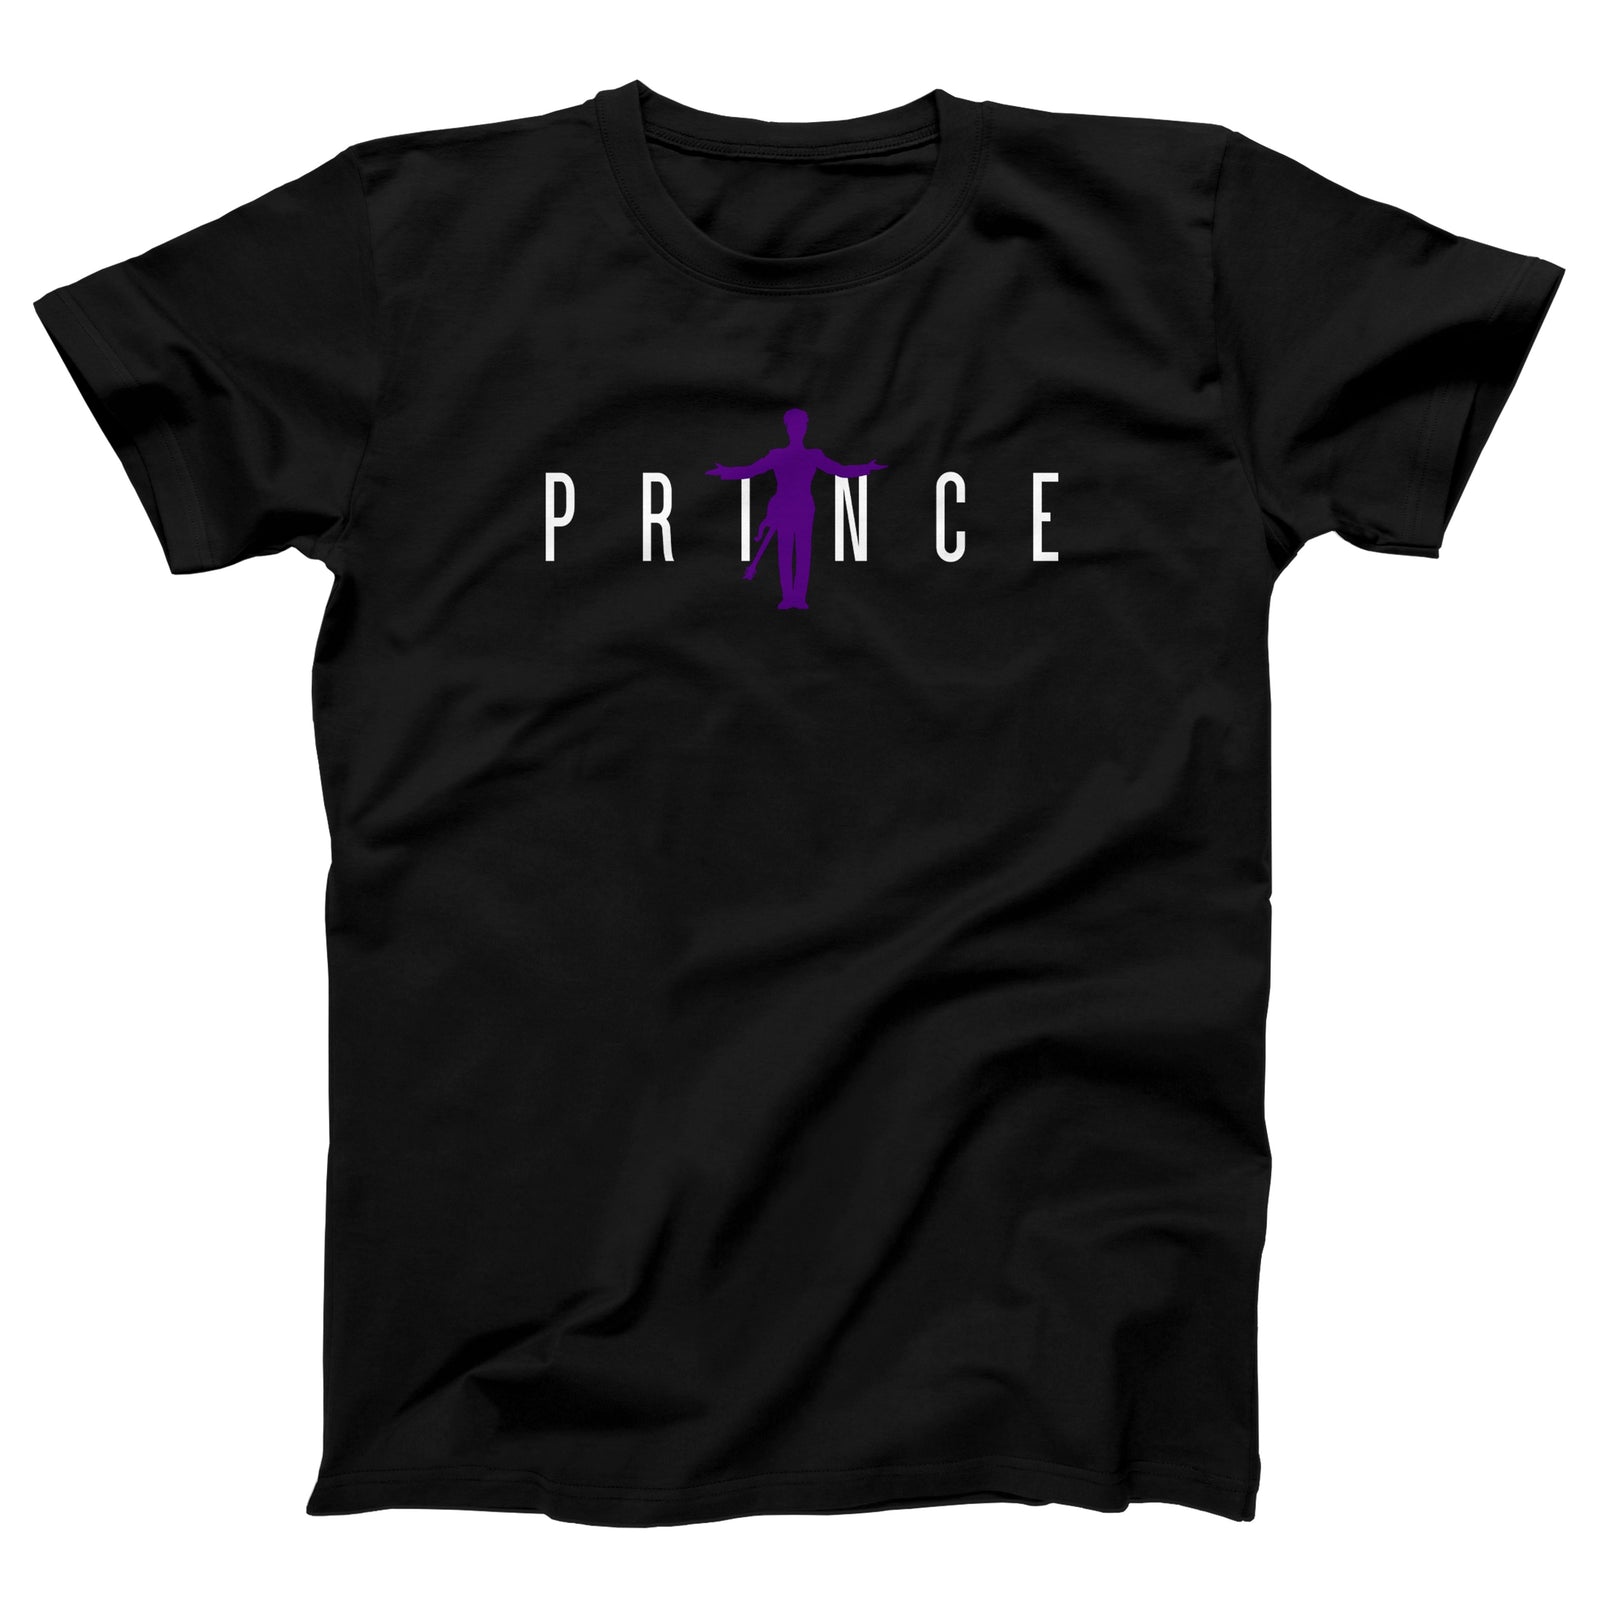 //cdn.shopify.com/s/files/1/0274/2488/2766/products/air-prince-menunisex-t-shirt-957728_5000x.jpg?v=1618251900 5000w,
    //cdn.shopify.com/s/files/1/0274/2488/2766/products/air-prince-menunisex-t-shirt-957728_4500x.jpg?v=1618251900 4500w,
    //cdn.shopify.com/s/files/1/0274/2488/2766/products/air-prince-menunisex-t-shirt-957728_4000x.jpg?v=1618251900 4000w,
    //cdn.shopify.com/s/files/1/0274/2488/2766/products/air-prince-menunisex-t-shirt-957728_3500x.jpg?v=1618251900 3500w,
    //cdn.shopify.com/s/files/1/0274/2488/2766/products/air-prince-menunisex-t-shirt-957728_3000x.jpg?v=1618251900 3000w,
    //cdn.shopify.com/s/files/1/0274/2488/2766/products/air-prince-menunisex-t-shirt-957728_2500x.jpg?v=1618251900 2500w,
    //cdn.shopify.com/s/files/1/0274/2488/2766/products/air-prince-menunisex-t-shirt-957728_2000x.jpg?v=1618251900 2000w,
    //cdn.shopify.com/s/files/1/0274/2488/2766/products/air-prince-menunisex-t-shirt-957728_1800x.jpg?v=1618251900 1800w,
    //cdn.shopify.com/s/files/1/0274/2488/2766/products/air-prince-menunisex-t-shirt-957728_1600x.jpg?v=1618251900 1600w,
    //cdn.shopify.com/s/files/1/0274/2488/2766/products/air-prince-menunisex-t-shirt-957728_1400x.jpg?v=1618251900 1400w,
    //cdn.shopify.com/s/files/1/0274/2488/2766/products/air-prince-menunisex-t-shirt-957728_1200x.jpg?v=1618251900 1200w,
    //cdn.shopify.com/s/files/1/0274/2488/2766/products/air-prince-menunisex-t-shirt-957728_1000x.jpg?v=1618251900 1000w,
    //cdn.shopify.com/s/files/1/0274/2488/2766/products/air-prince-menunisex-t-shirt-957728_800x.jpg?v=1618251900 800w,
    //cdn.shopify.com/s/files/1/0274/2488/2766/products/air-prince-menunisex-t-shirt-957728_600x.jpg?v=1618251900 600w,
    //cdn.shopify.com/s/files/1/0274/2488/2766/products/air-prince-menunisex-t-shirt-957728_400x.jpg?v=1618251900 400w,
    //cdn.shopify.com/s/files/1/0274/2488/2766/products/air-prince-menunisex-t-shirt-957728_200x.jpg?v=1618251900 200w